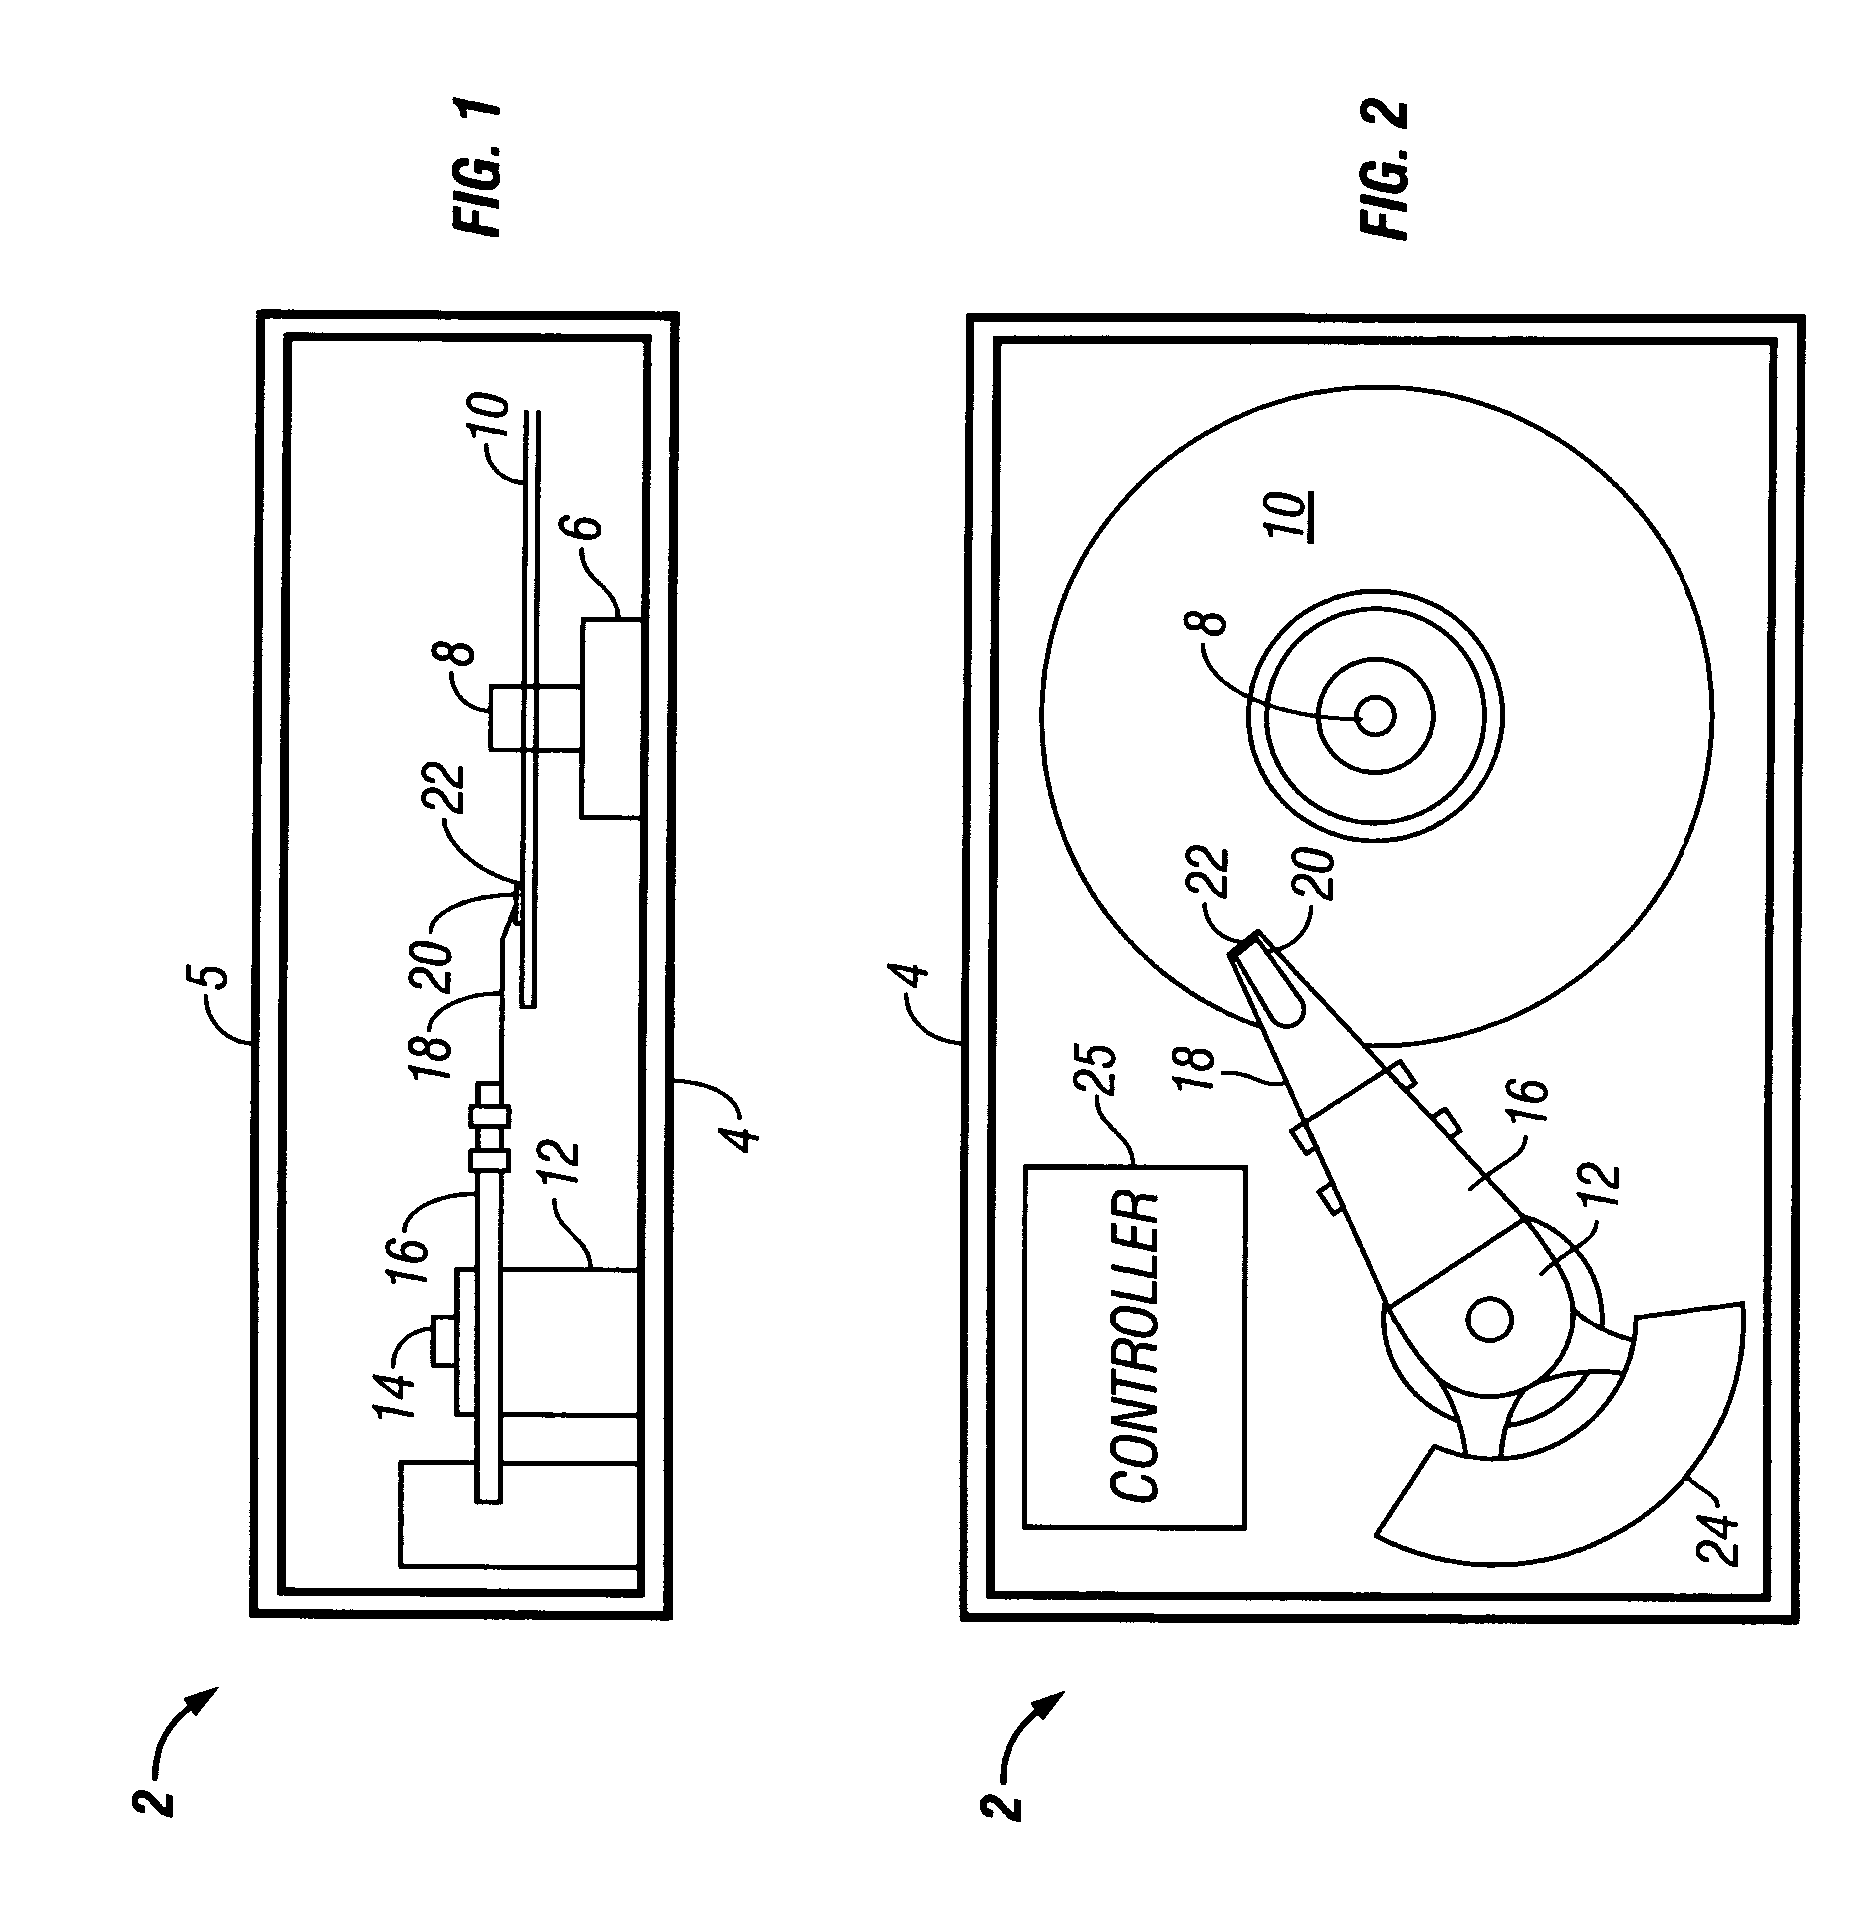 Self aligned magnetoresistive flux guide read head with exchange bias underneath free layer